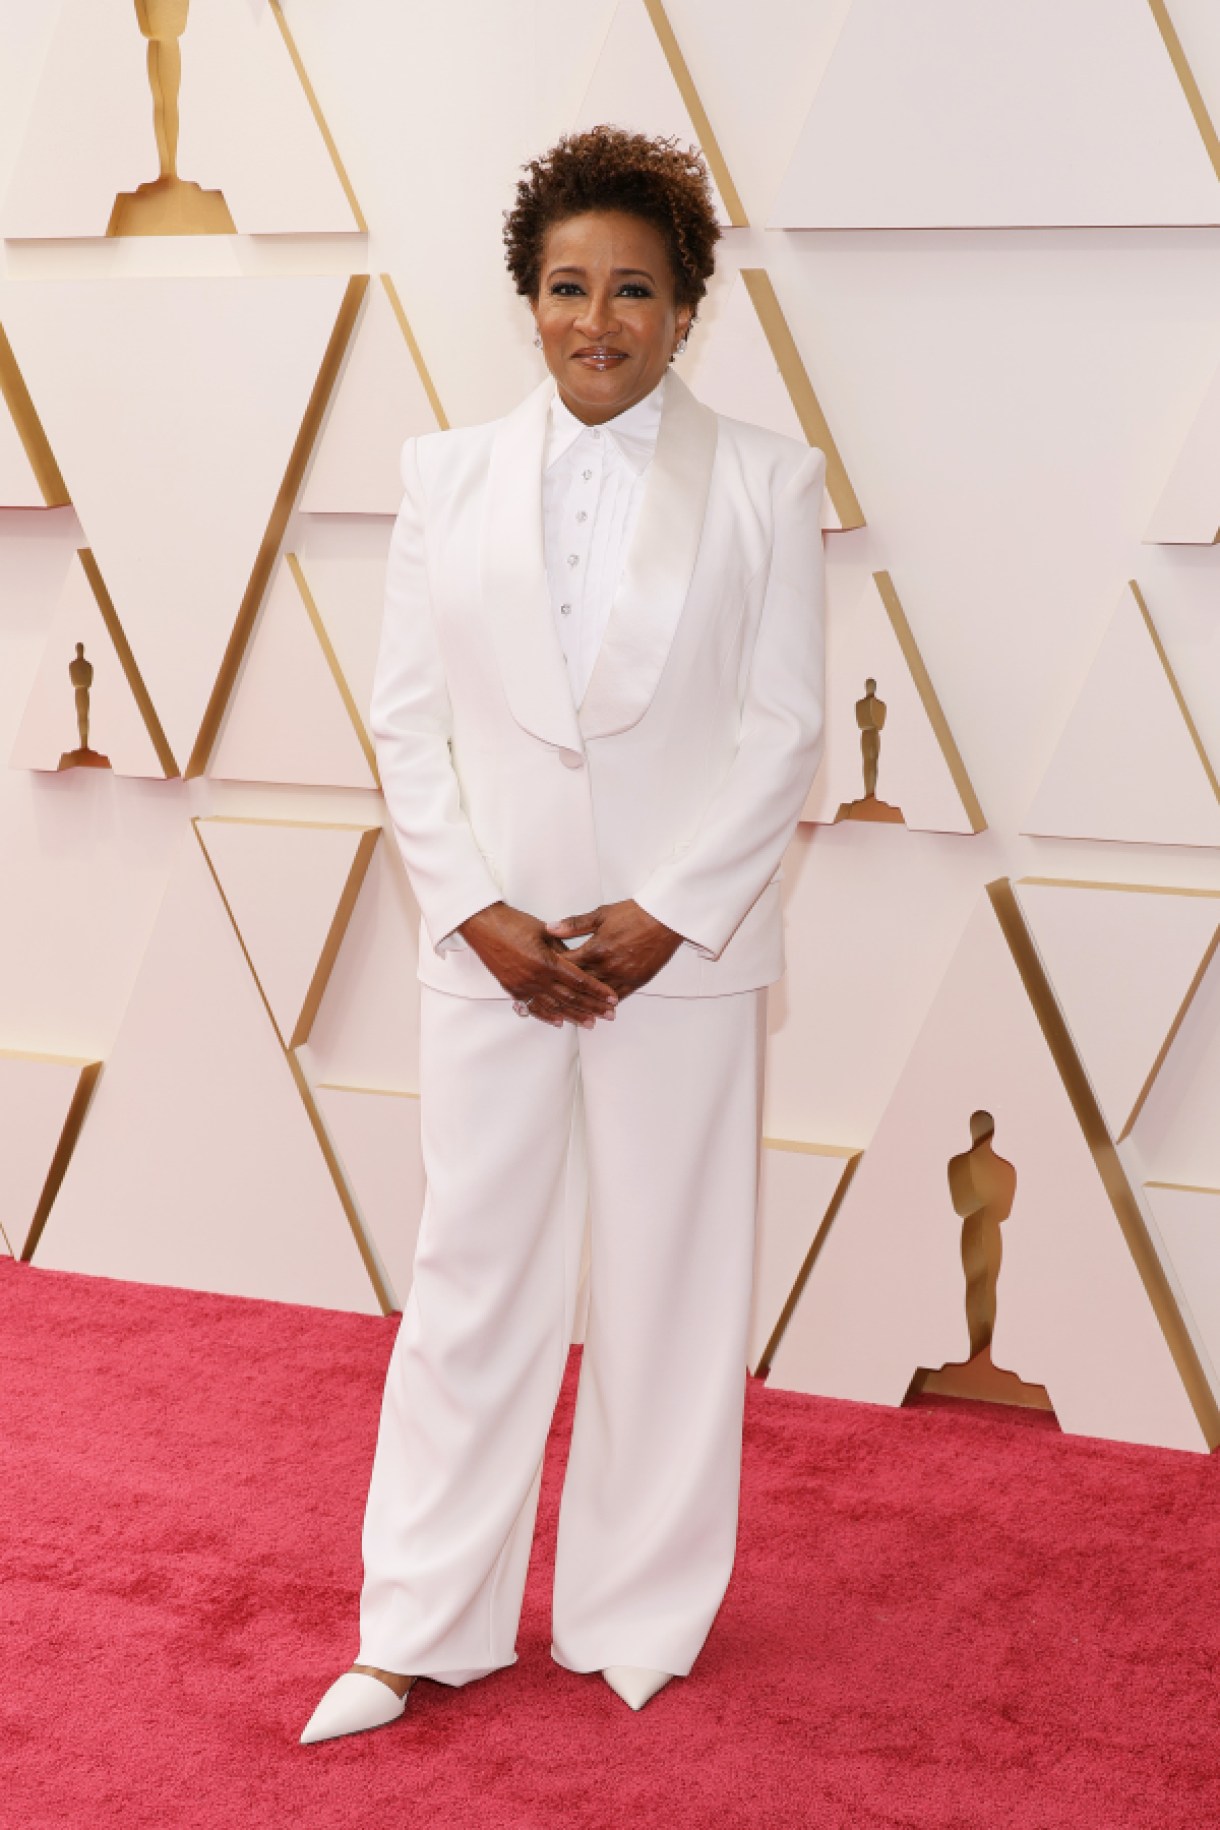 HOLLYWOOD, CALIFORNIA - MARCH 27: Wanda Sykes attends the 94th Annual Academy Awards at Hollywood and Highland on March 27, 2022 in Hollywood, California. (Photo by Mike Coppola/Getty Images)